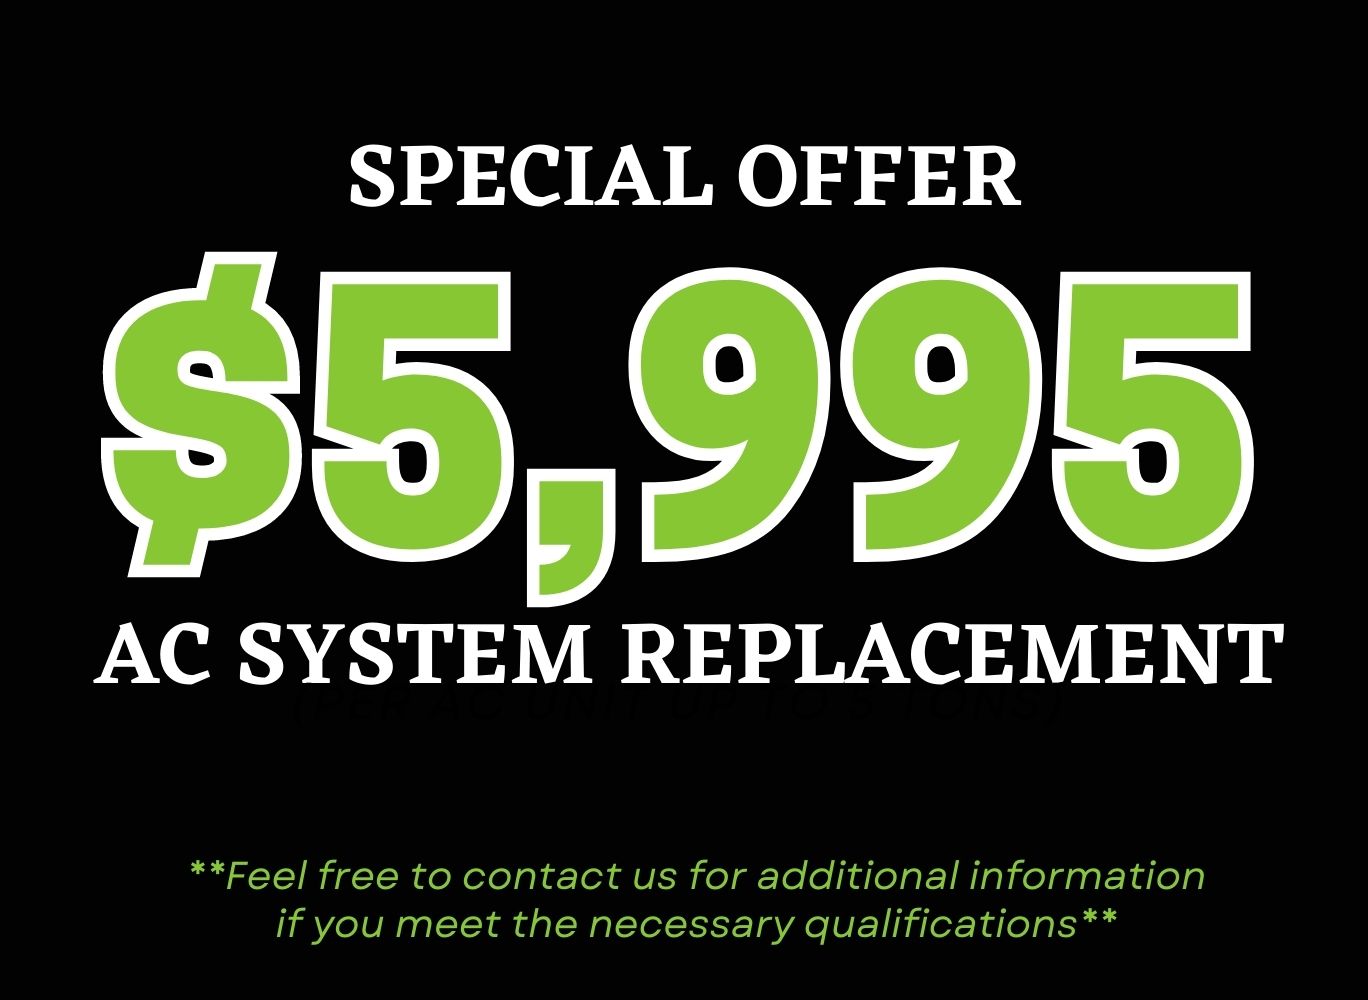 Special Offer $5,995 AC System Replacement